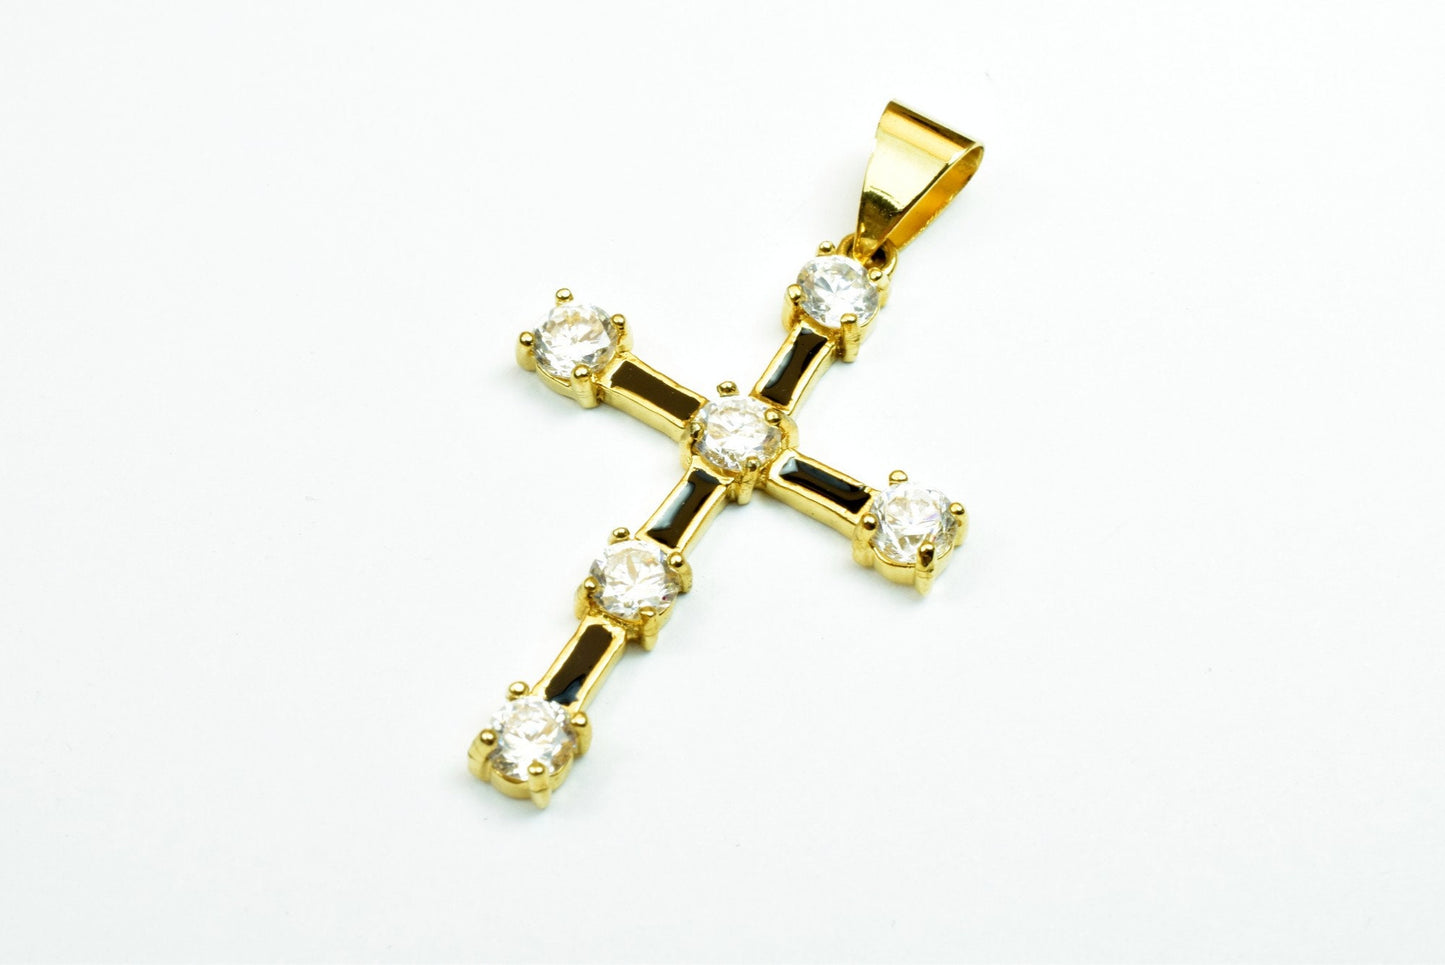 18K as Gold Filled* Black Cross Pendant With Rhinestone CZ Cubic Zirconia Size 42x38mm Christian Religious Charm For Jewelry Making